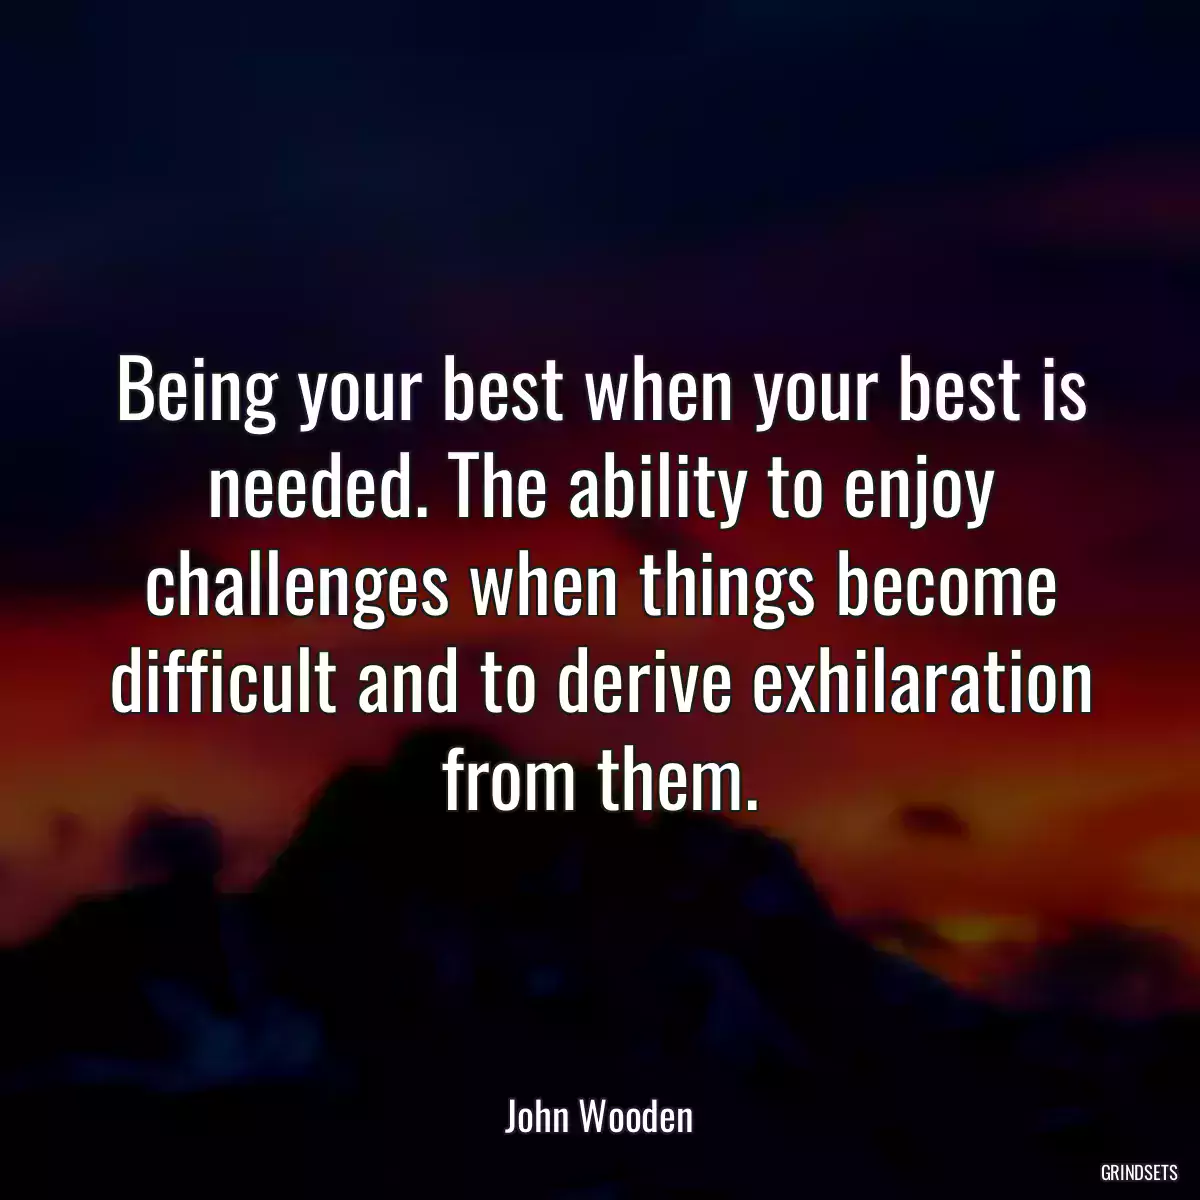 Being your best when your best is needed. The ability to enjoy challenges when things become difficult and to derive exhilaration from them.